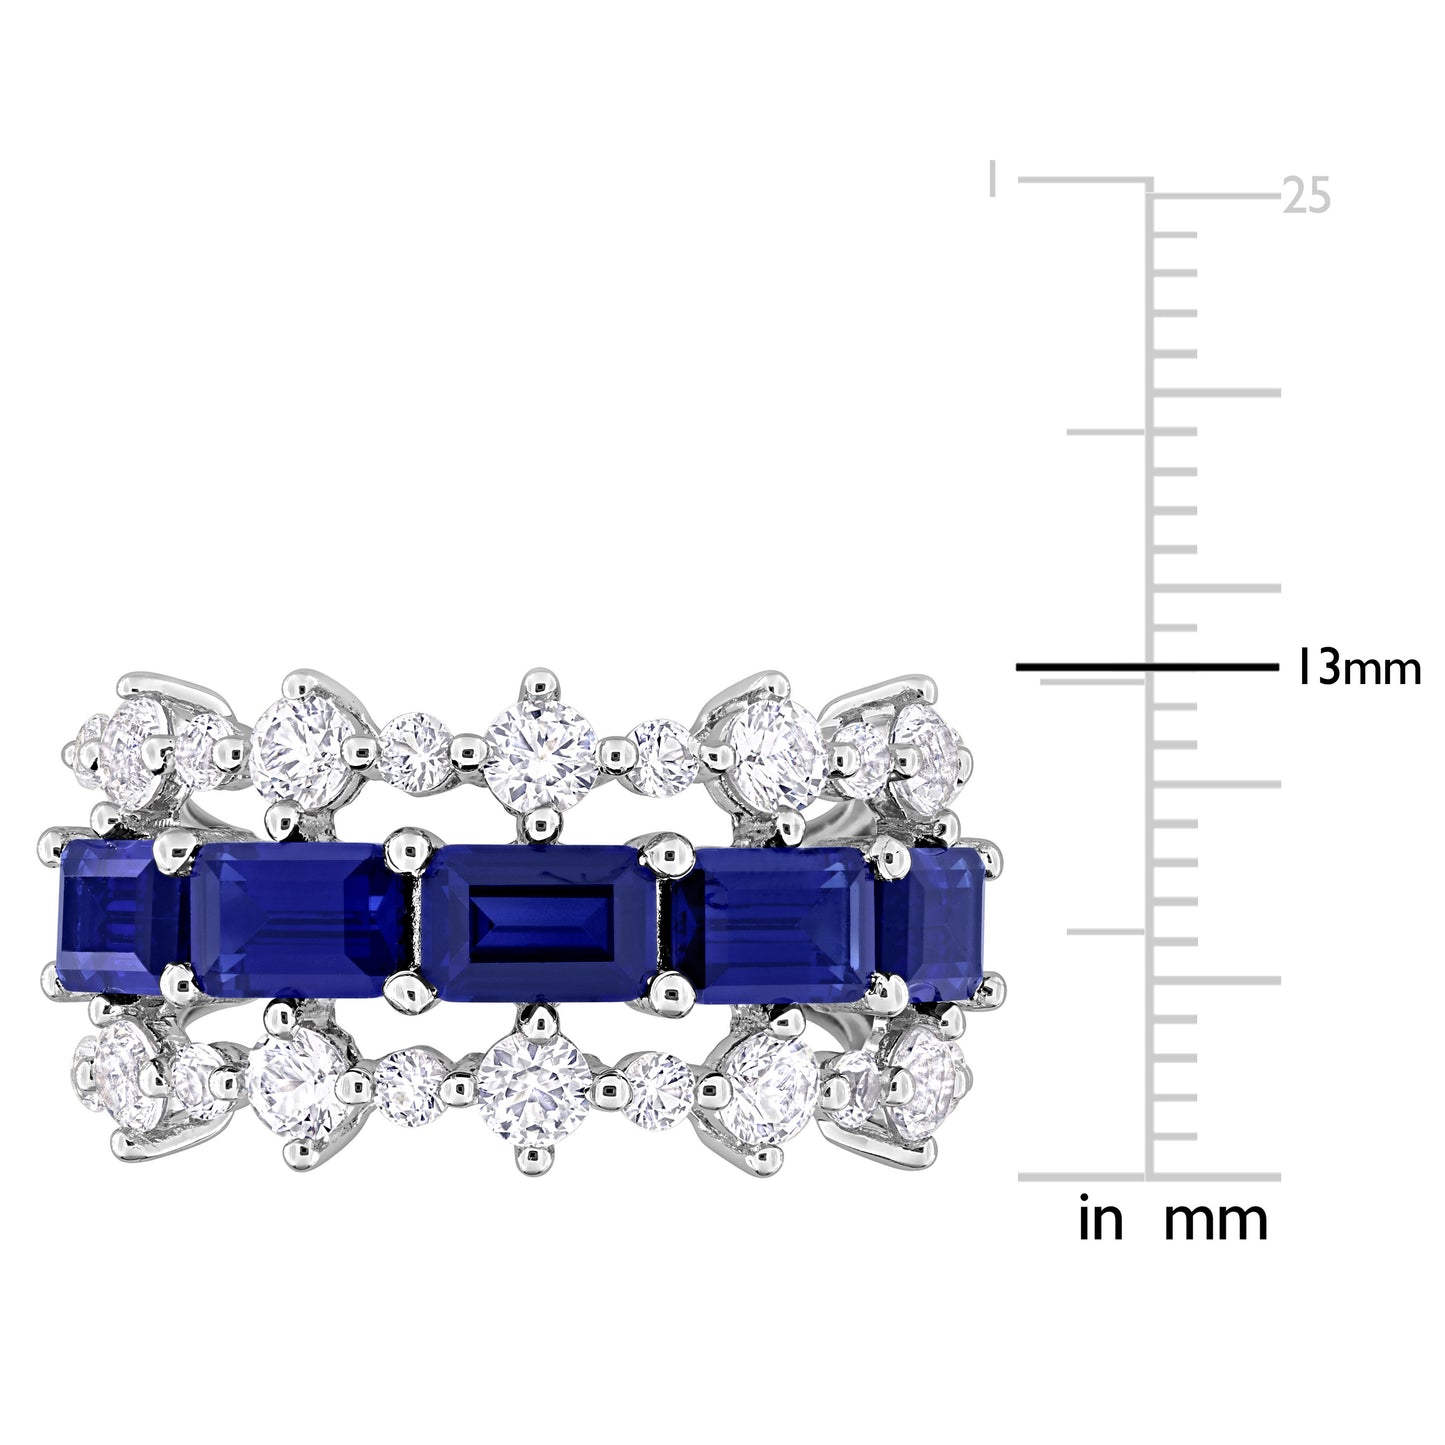 Blue and White Sapphire Three Row Ring